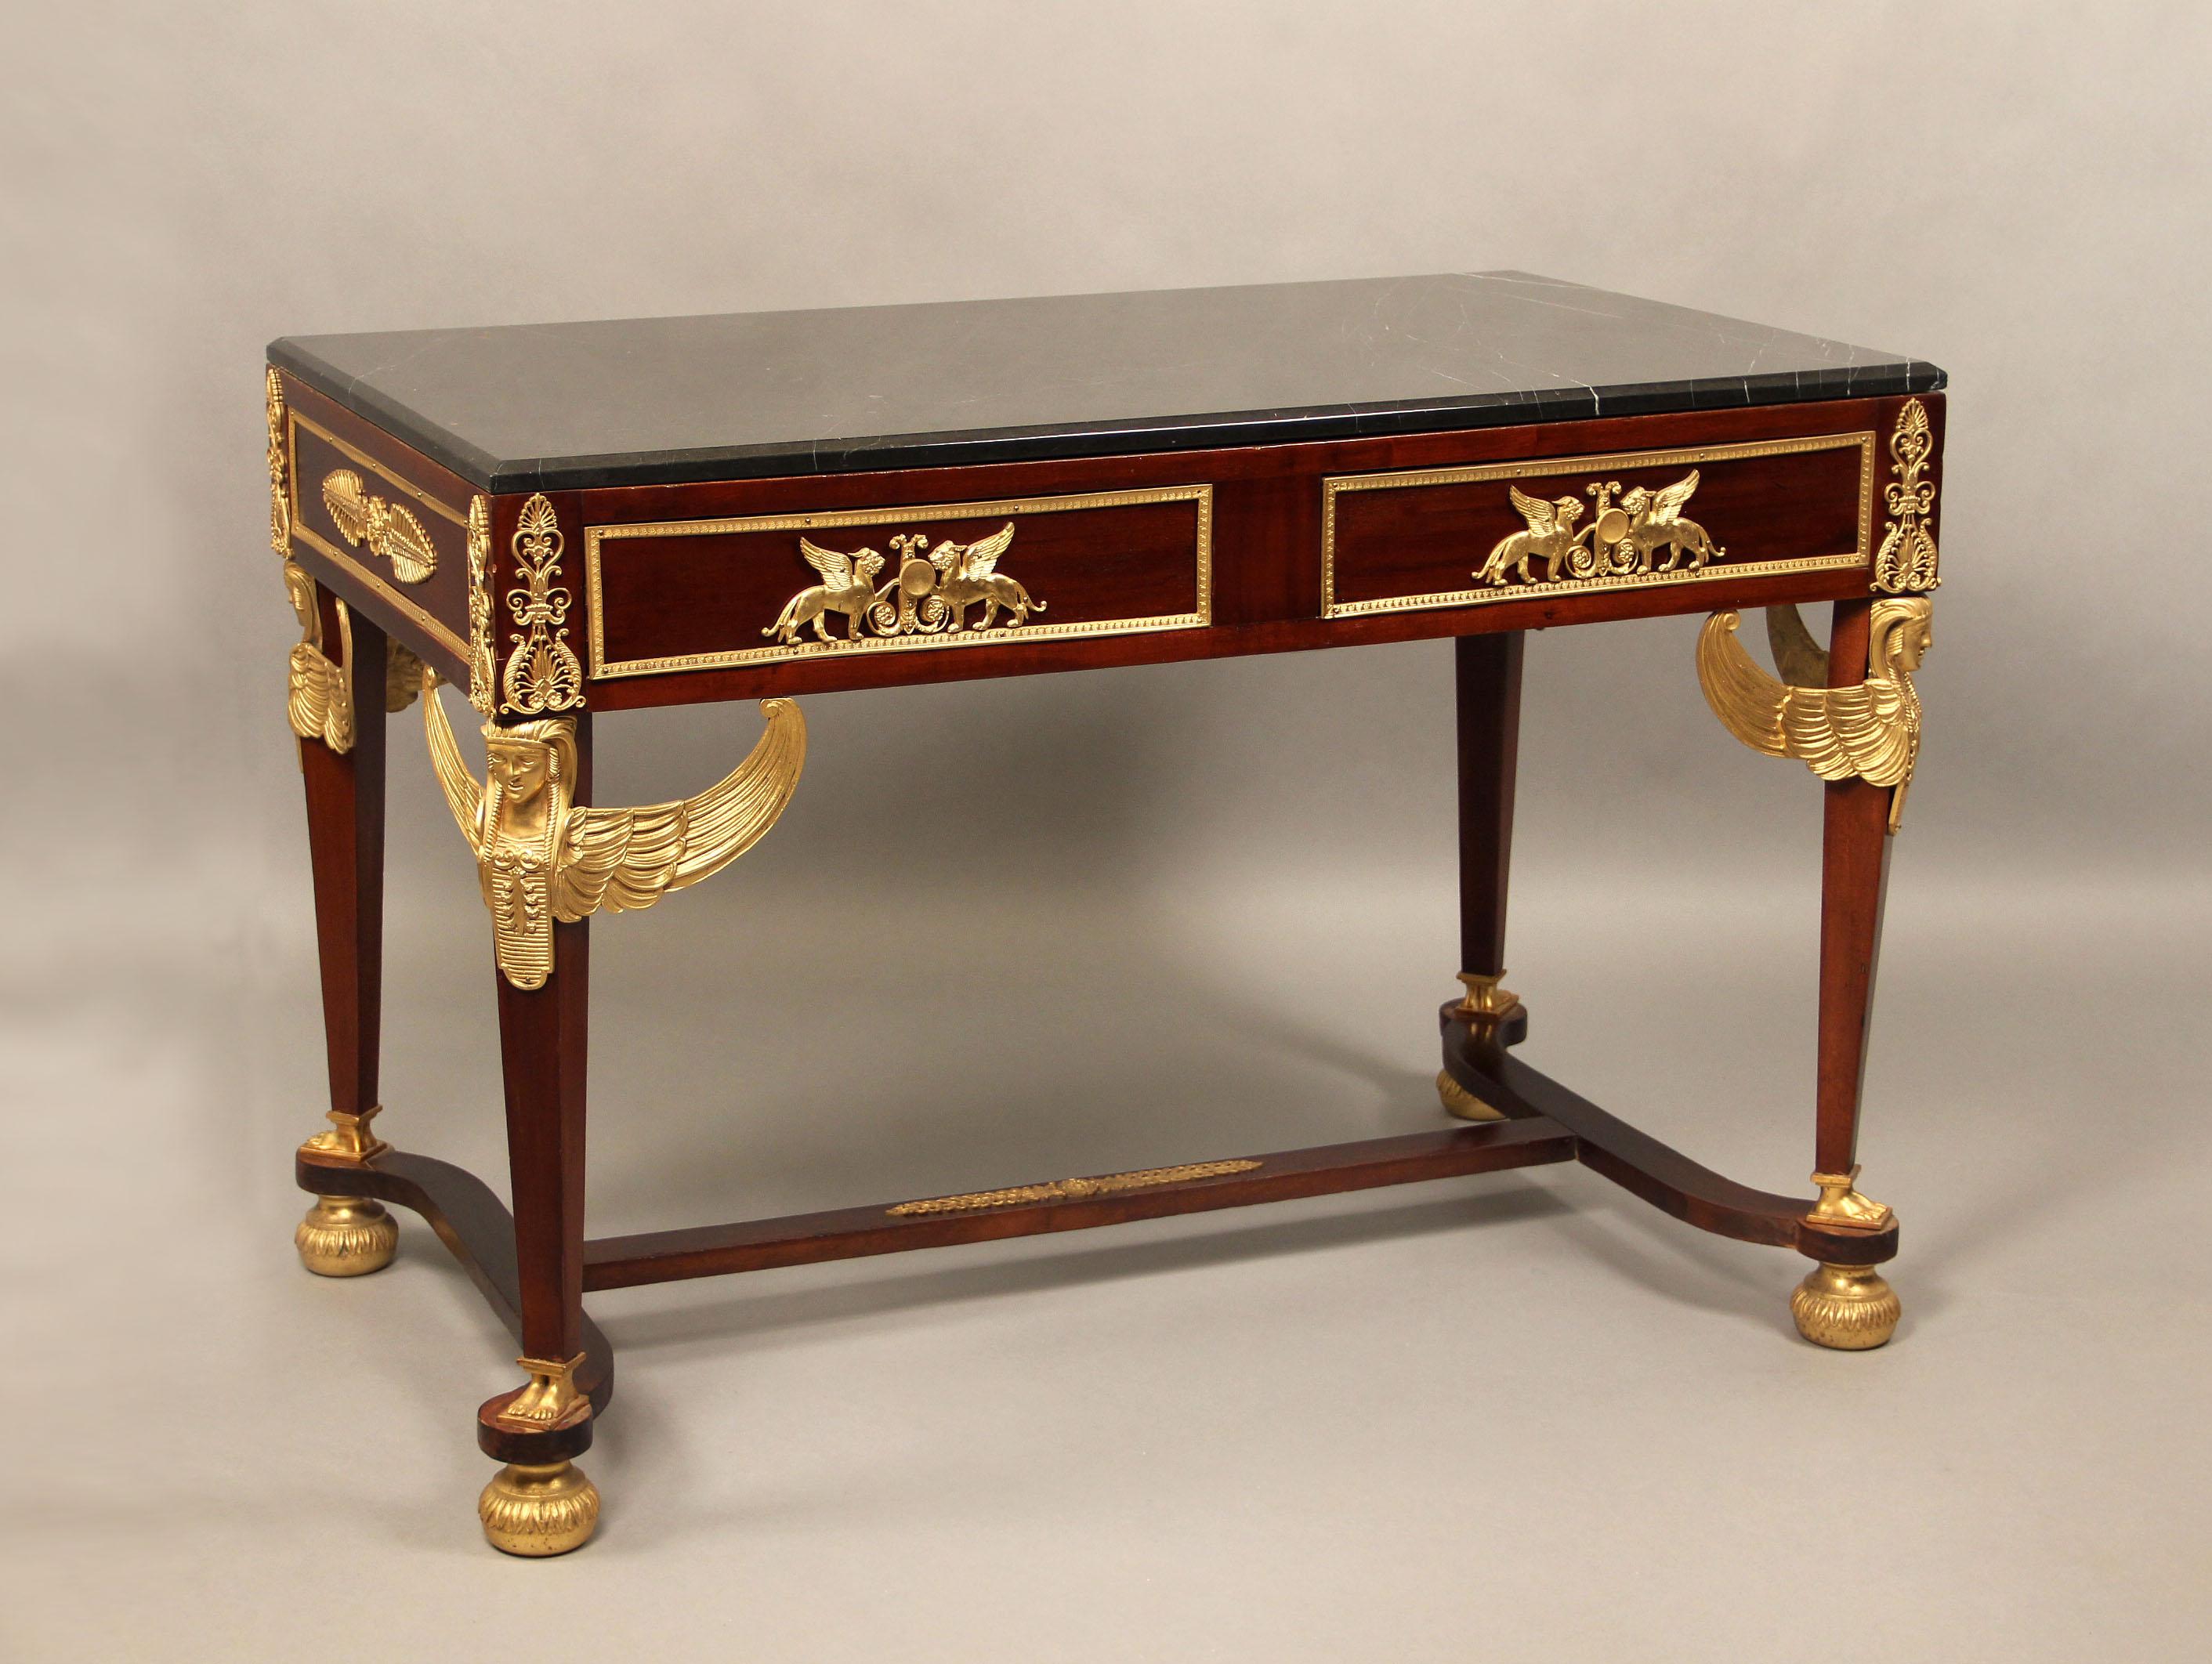 French late 19th gilt bronze-mounted mahogany center table in the Empire revival style.

With rectangular black marble top with a molded edge, above a pair of frieze drawer, supported on winged-female term support, 